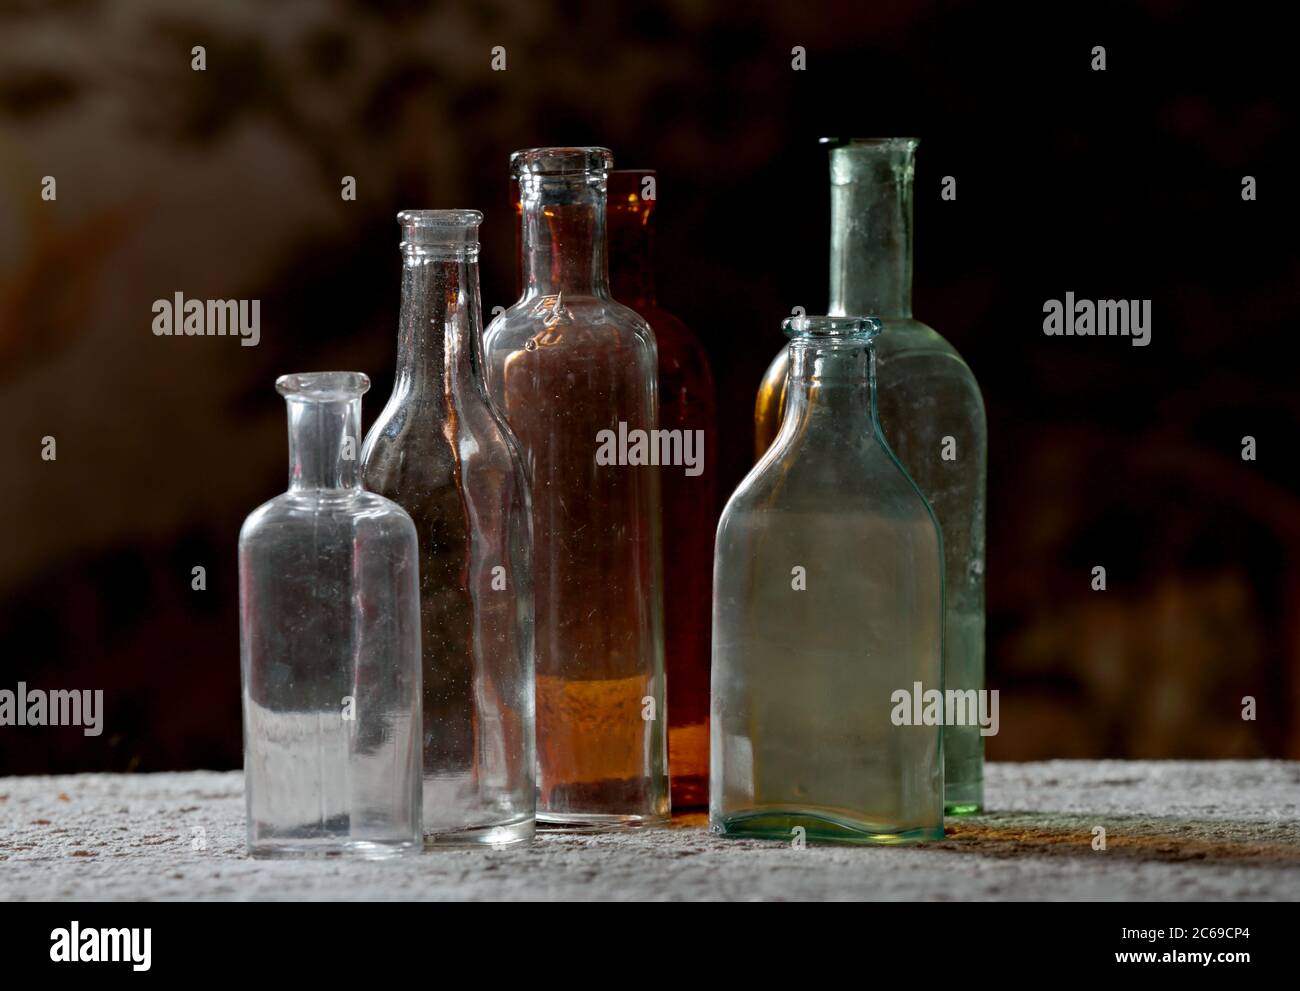 Dusty antique bottles in different colors Stock Photo